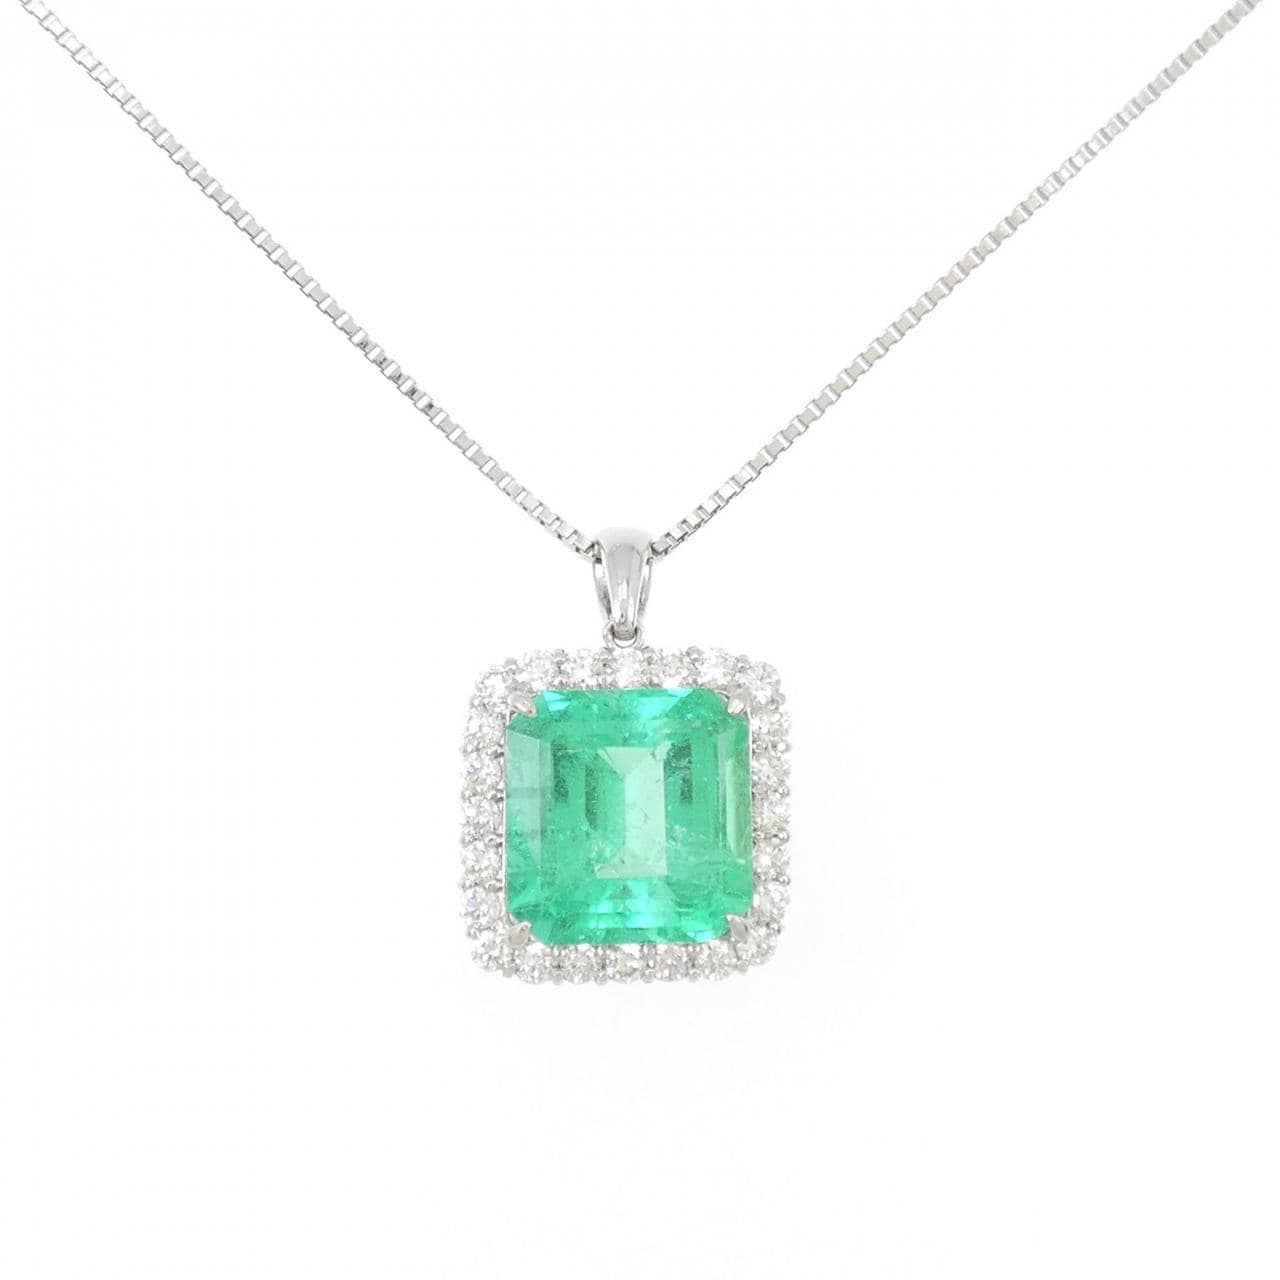 [Remake] PT Emerald Necklace 7.36CT Made in Colombia